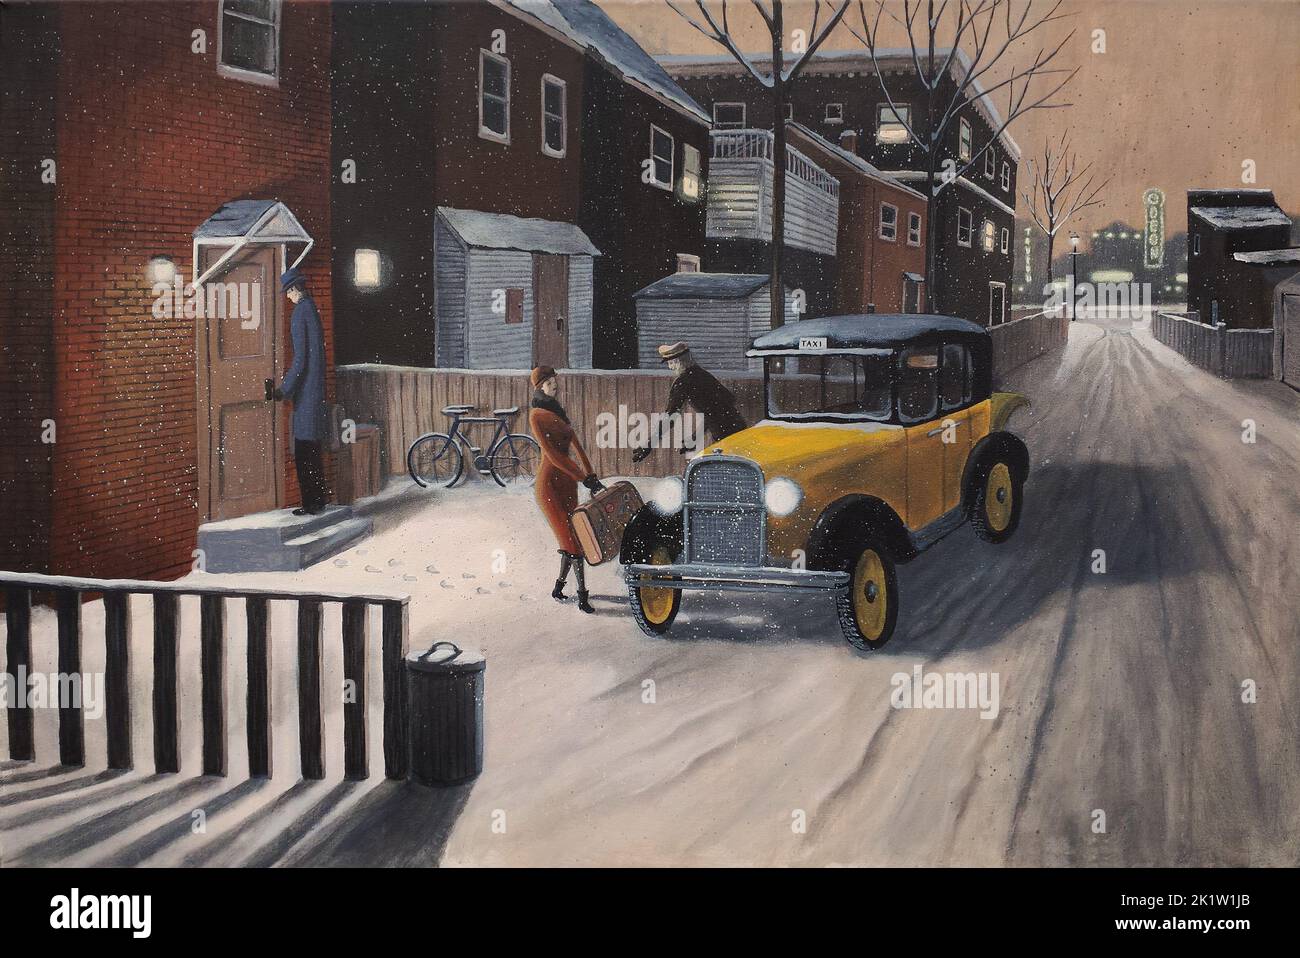 Vintage 1930s scene of a couple getting into a yellow taxi in the back alley behind their house on a snowy winter night. Stock Photo